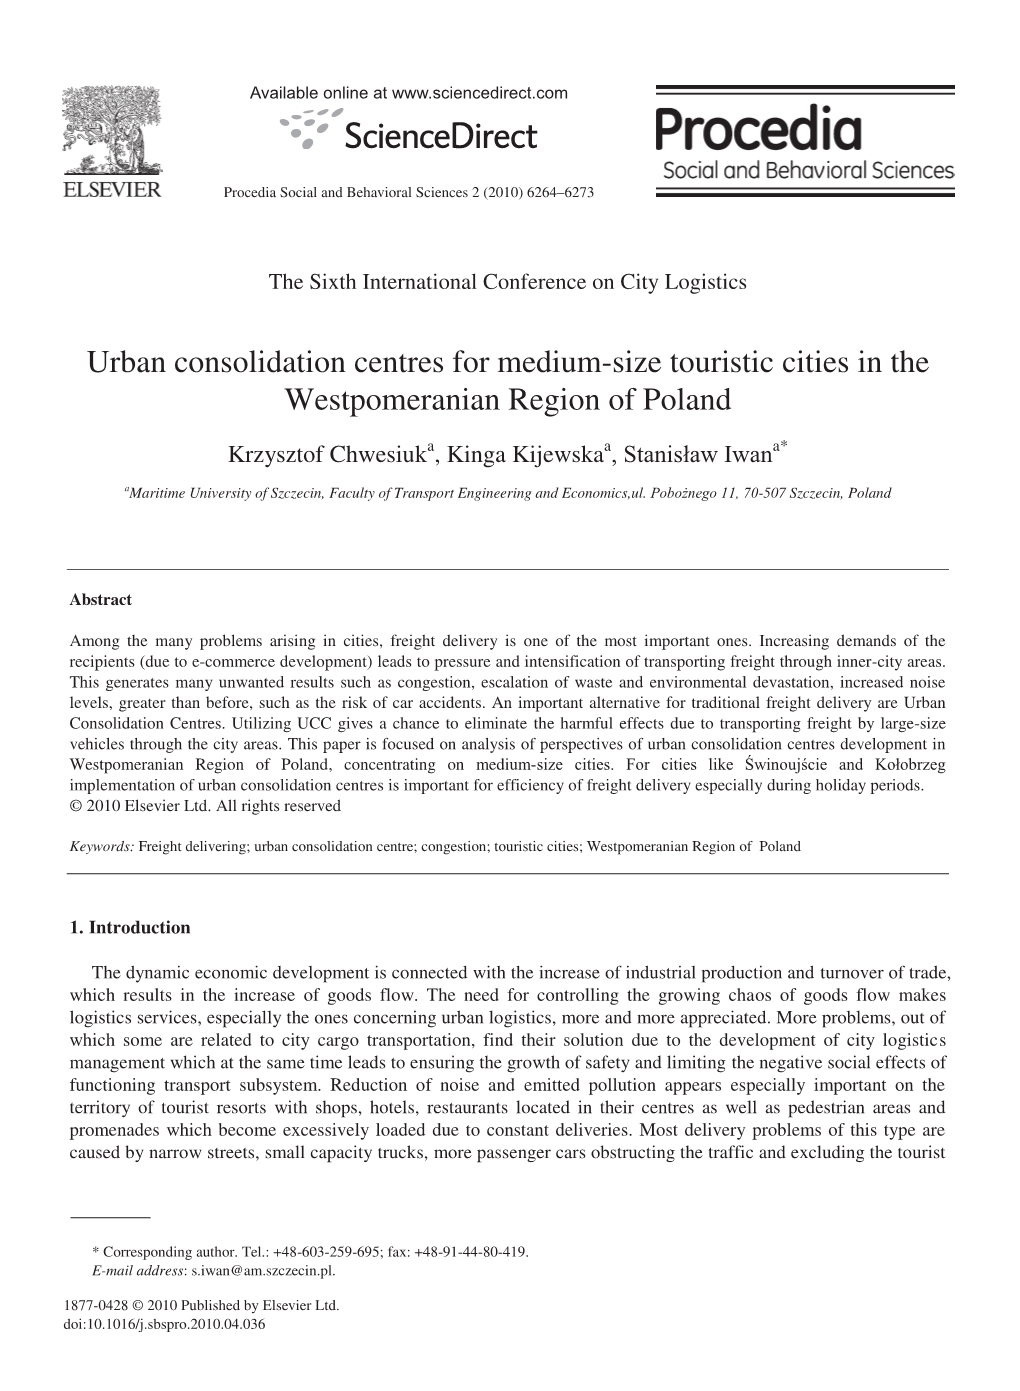 Urban Consolidation Centres for Medium-Size Touristic Cities in the Westpomeranian Region of Poland